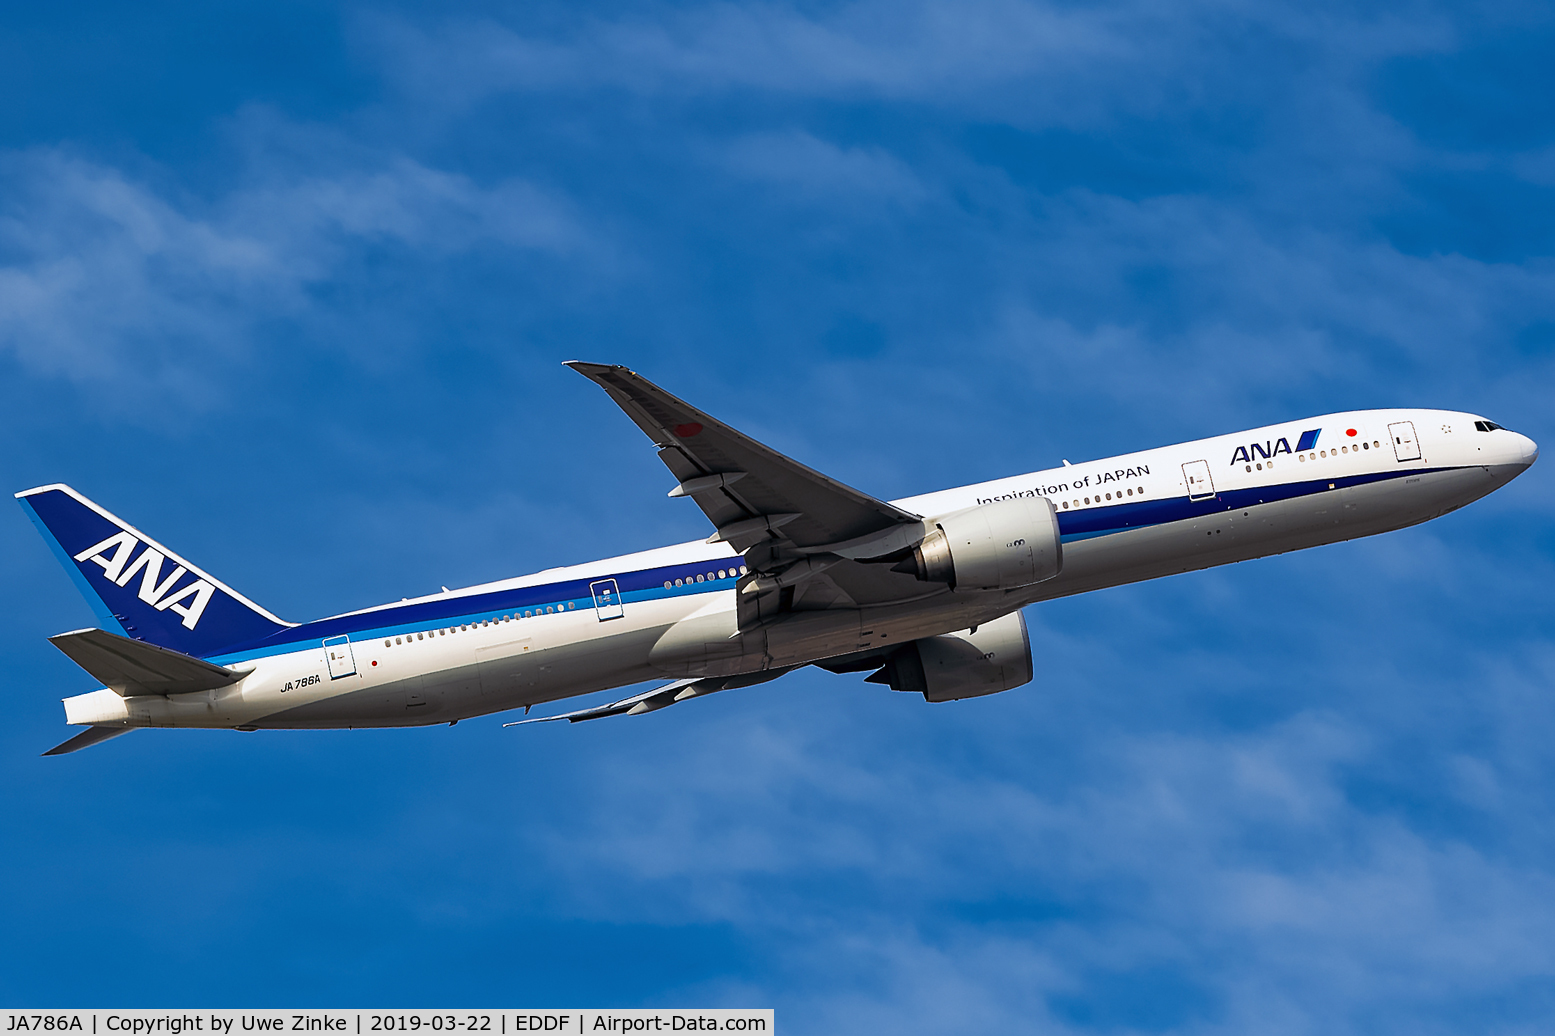 JA786A, 2010 Boeing 777-381/ER C/N 37948, one of the long ones